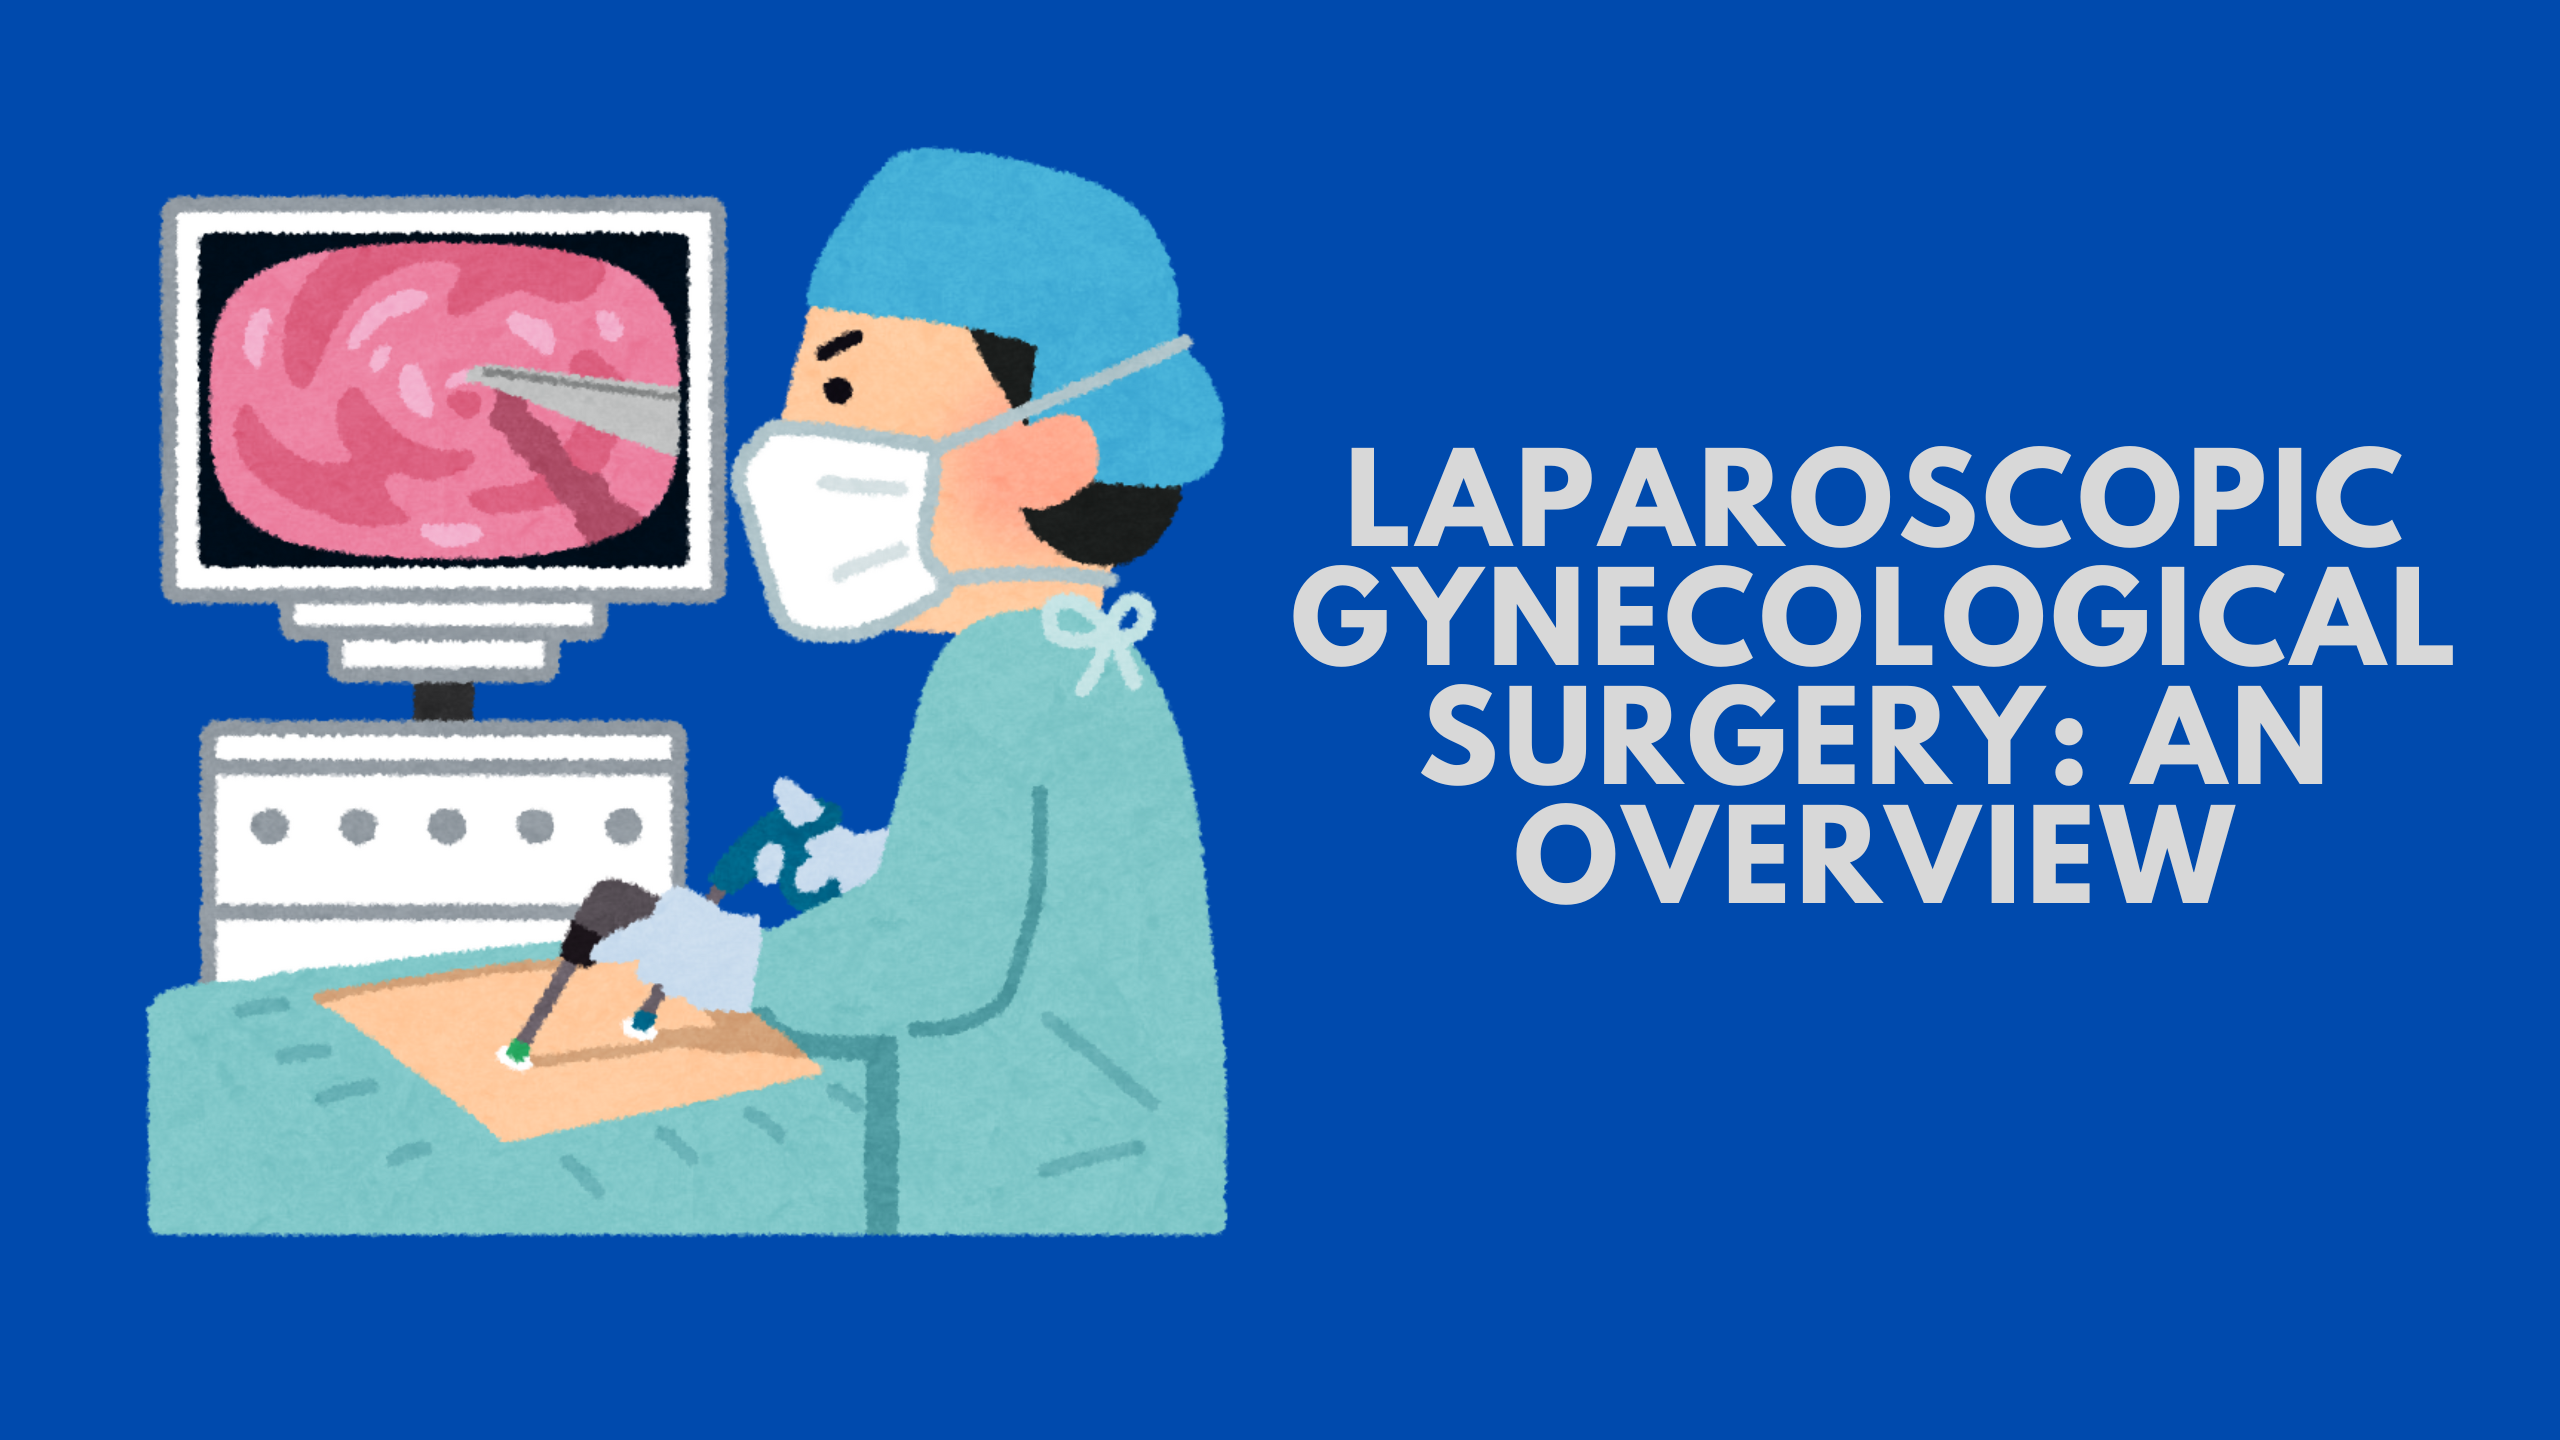 Laparoscopic gynecological surgery: an overview